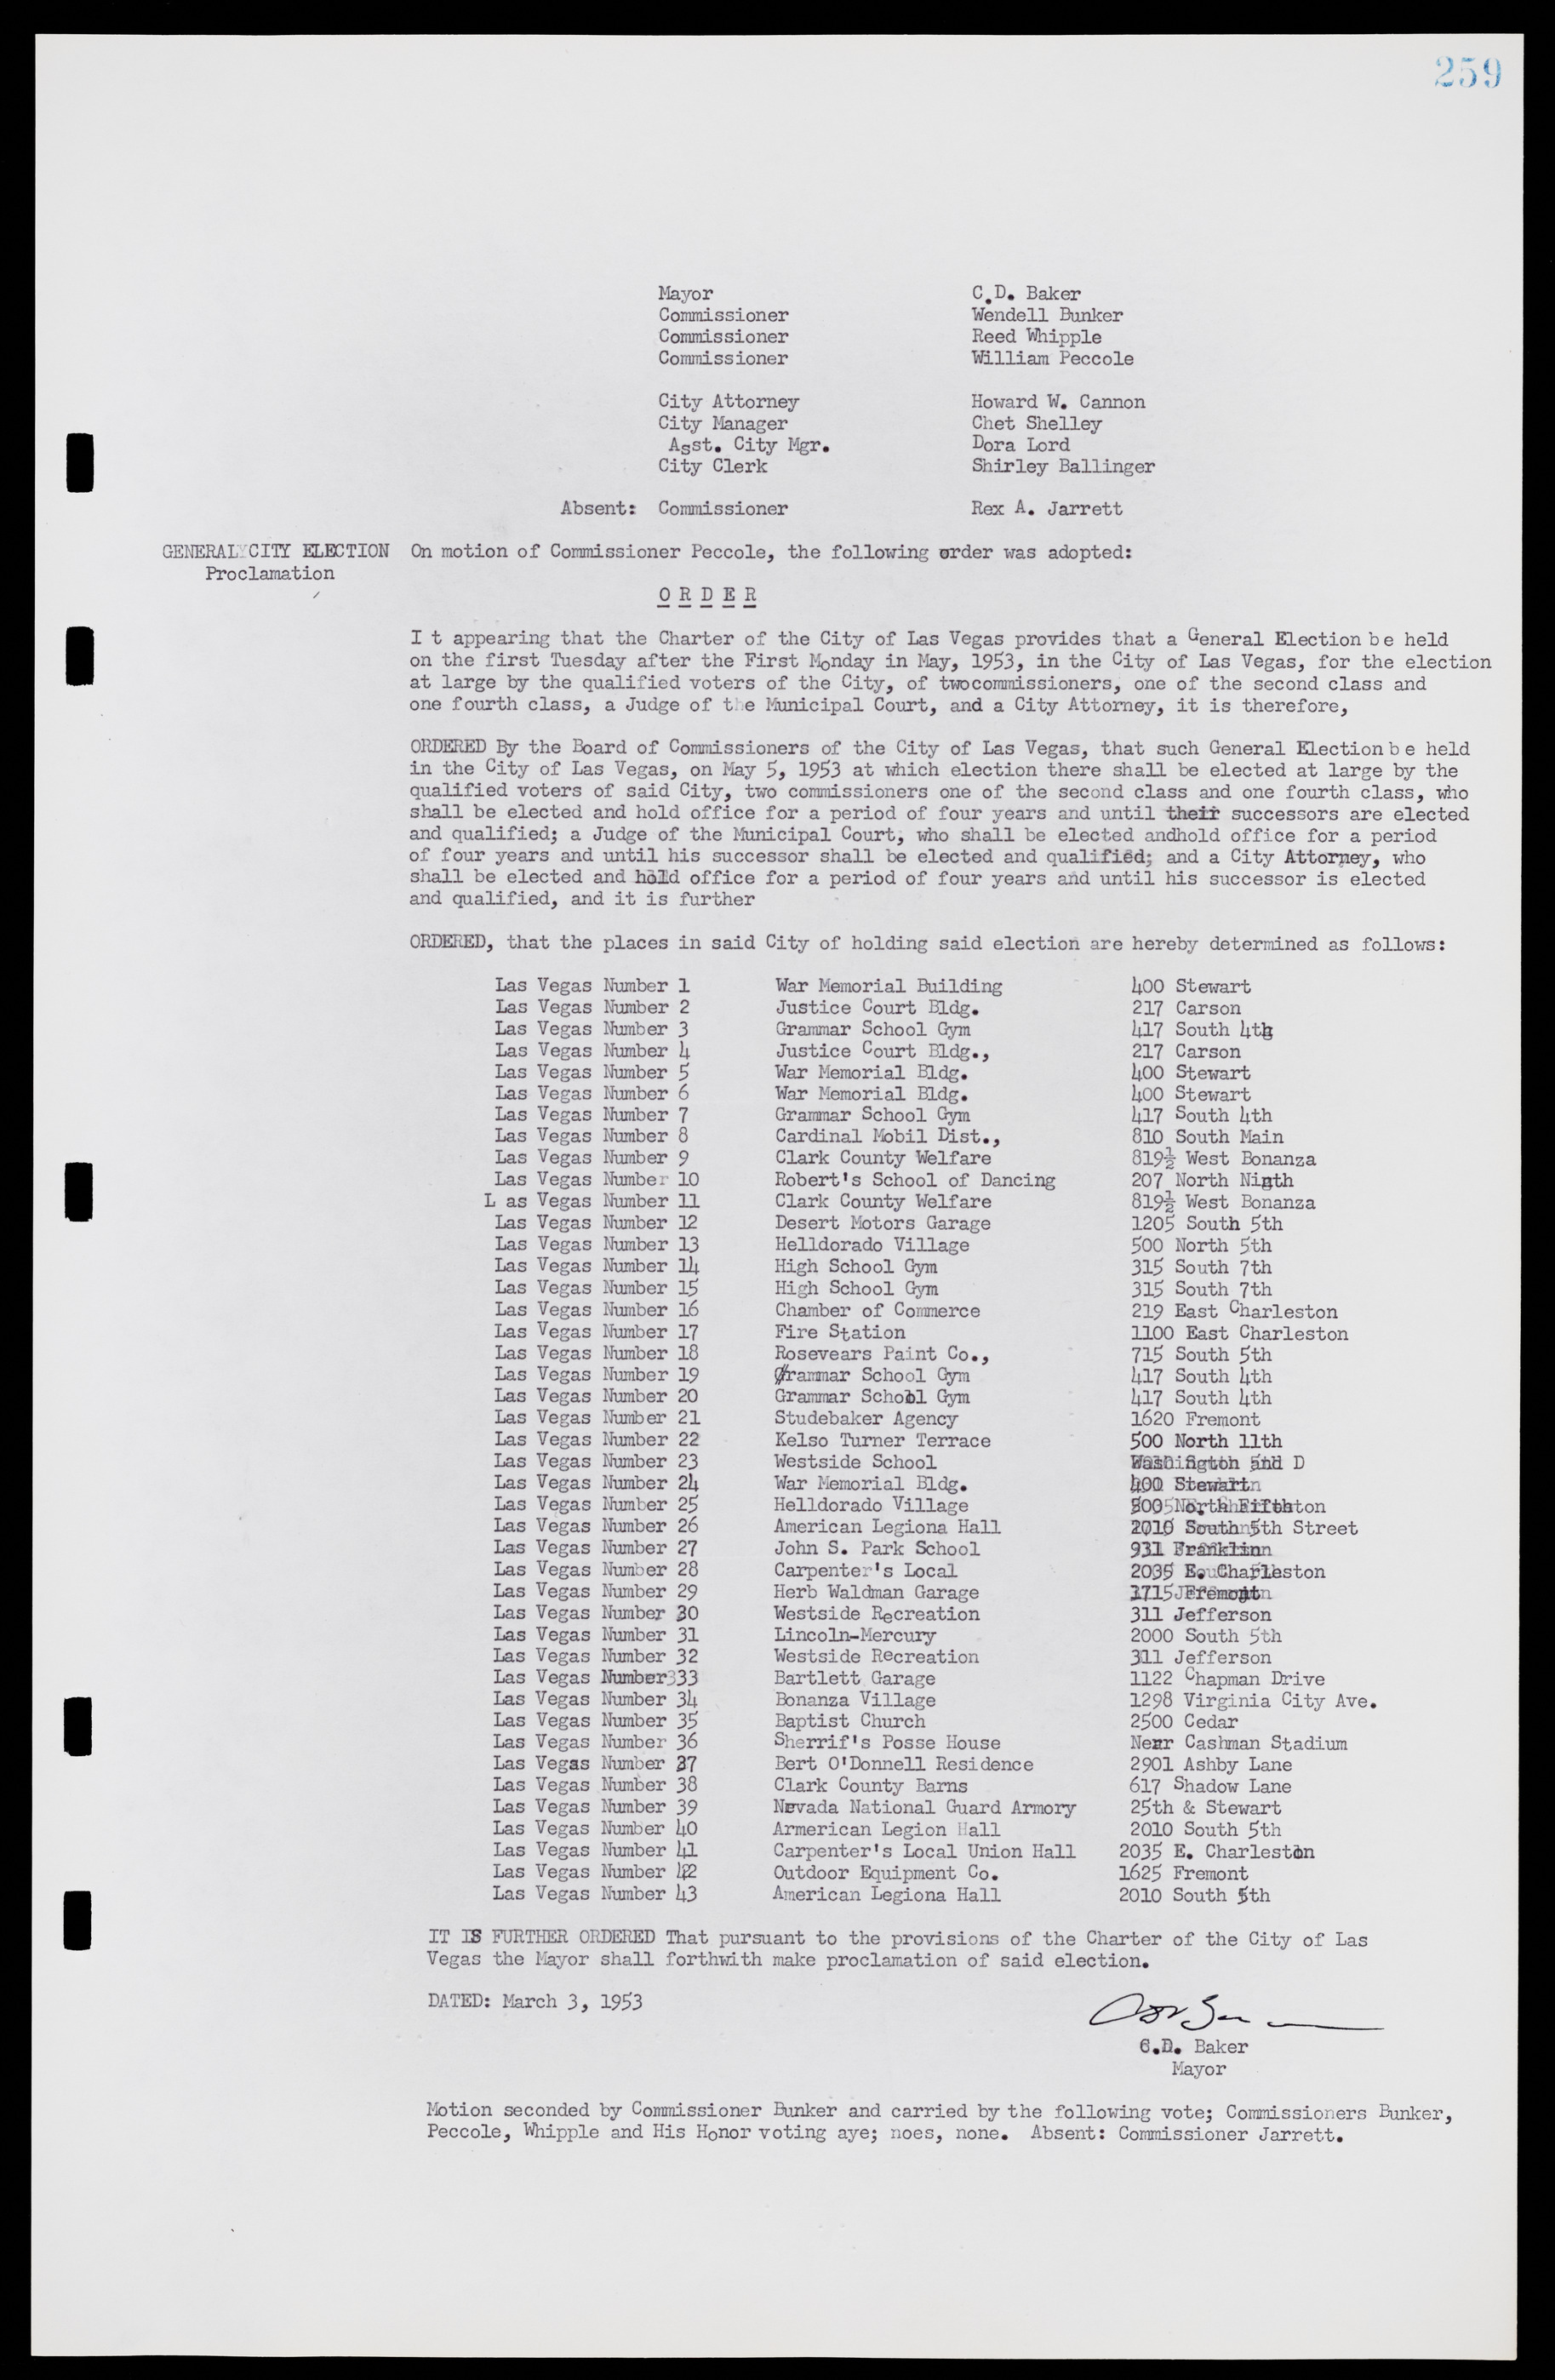 Las Vegas City Commission Minutes, May 26, 1952 to February 17, 1954, lvc000008-275